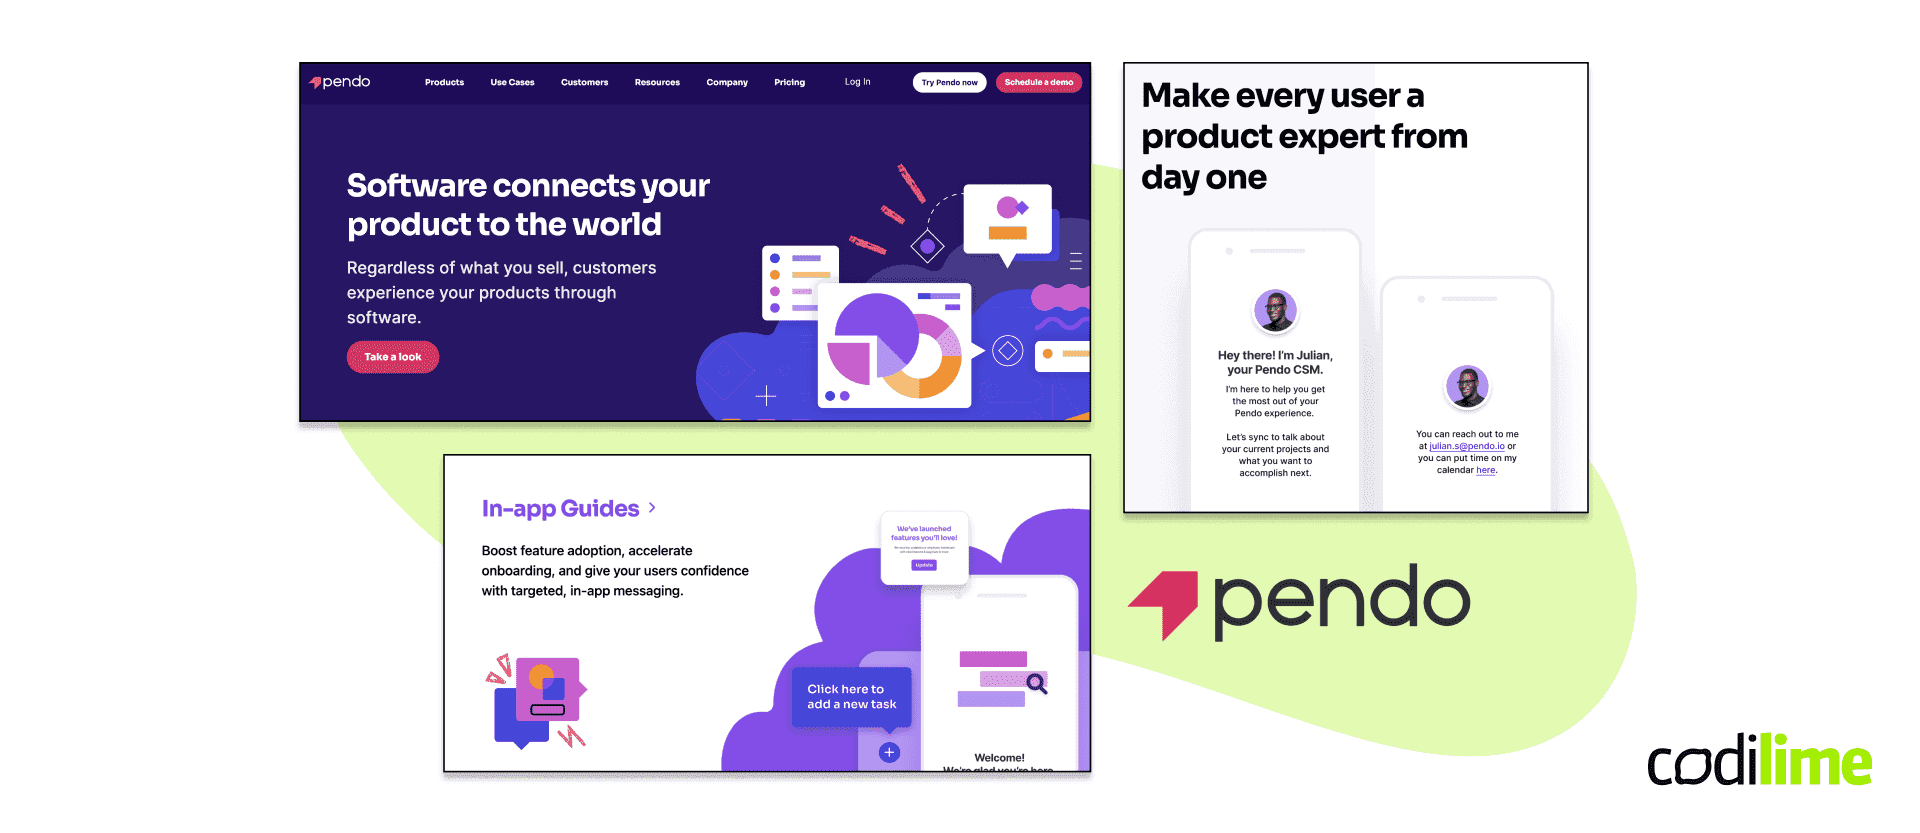  Tools for prototyping - Pendo